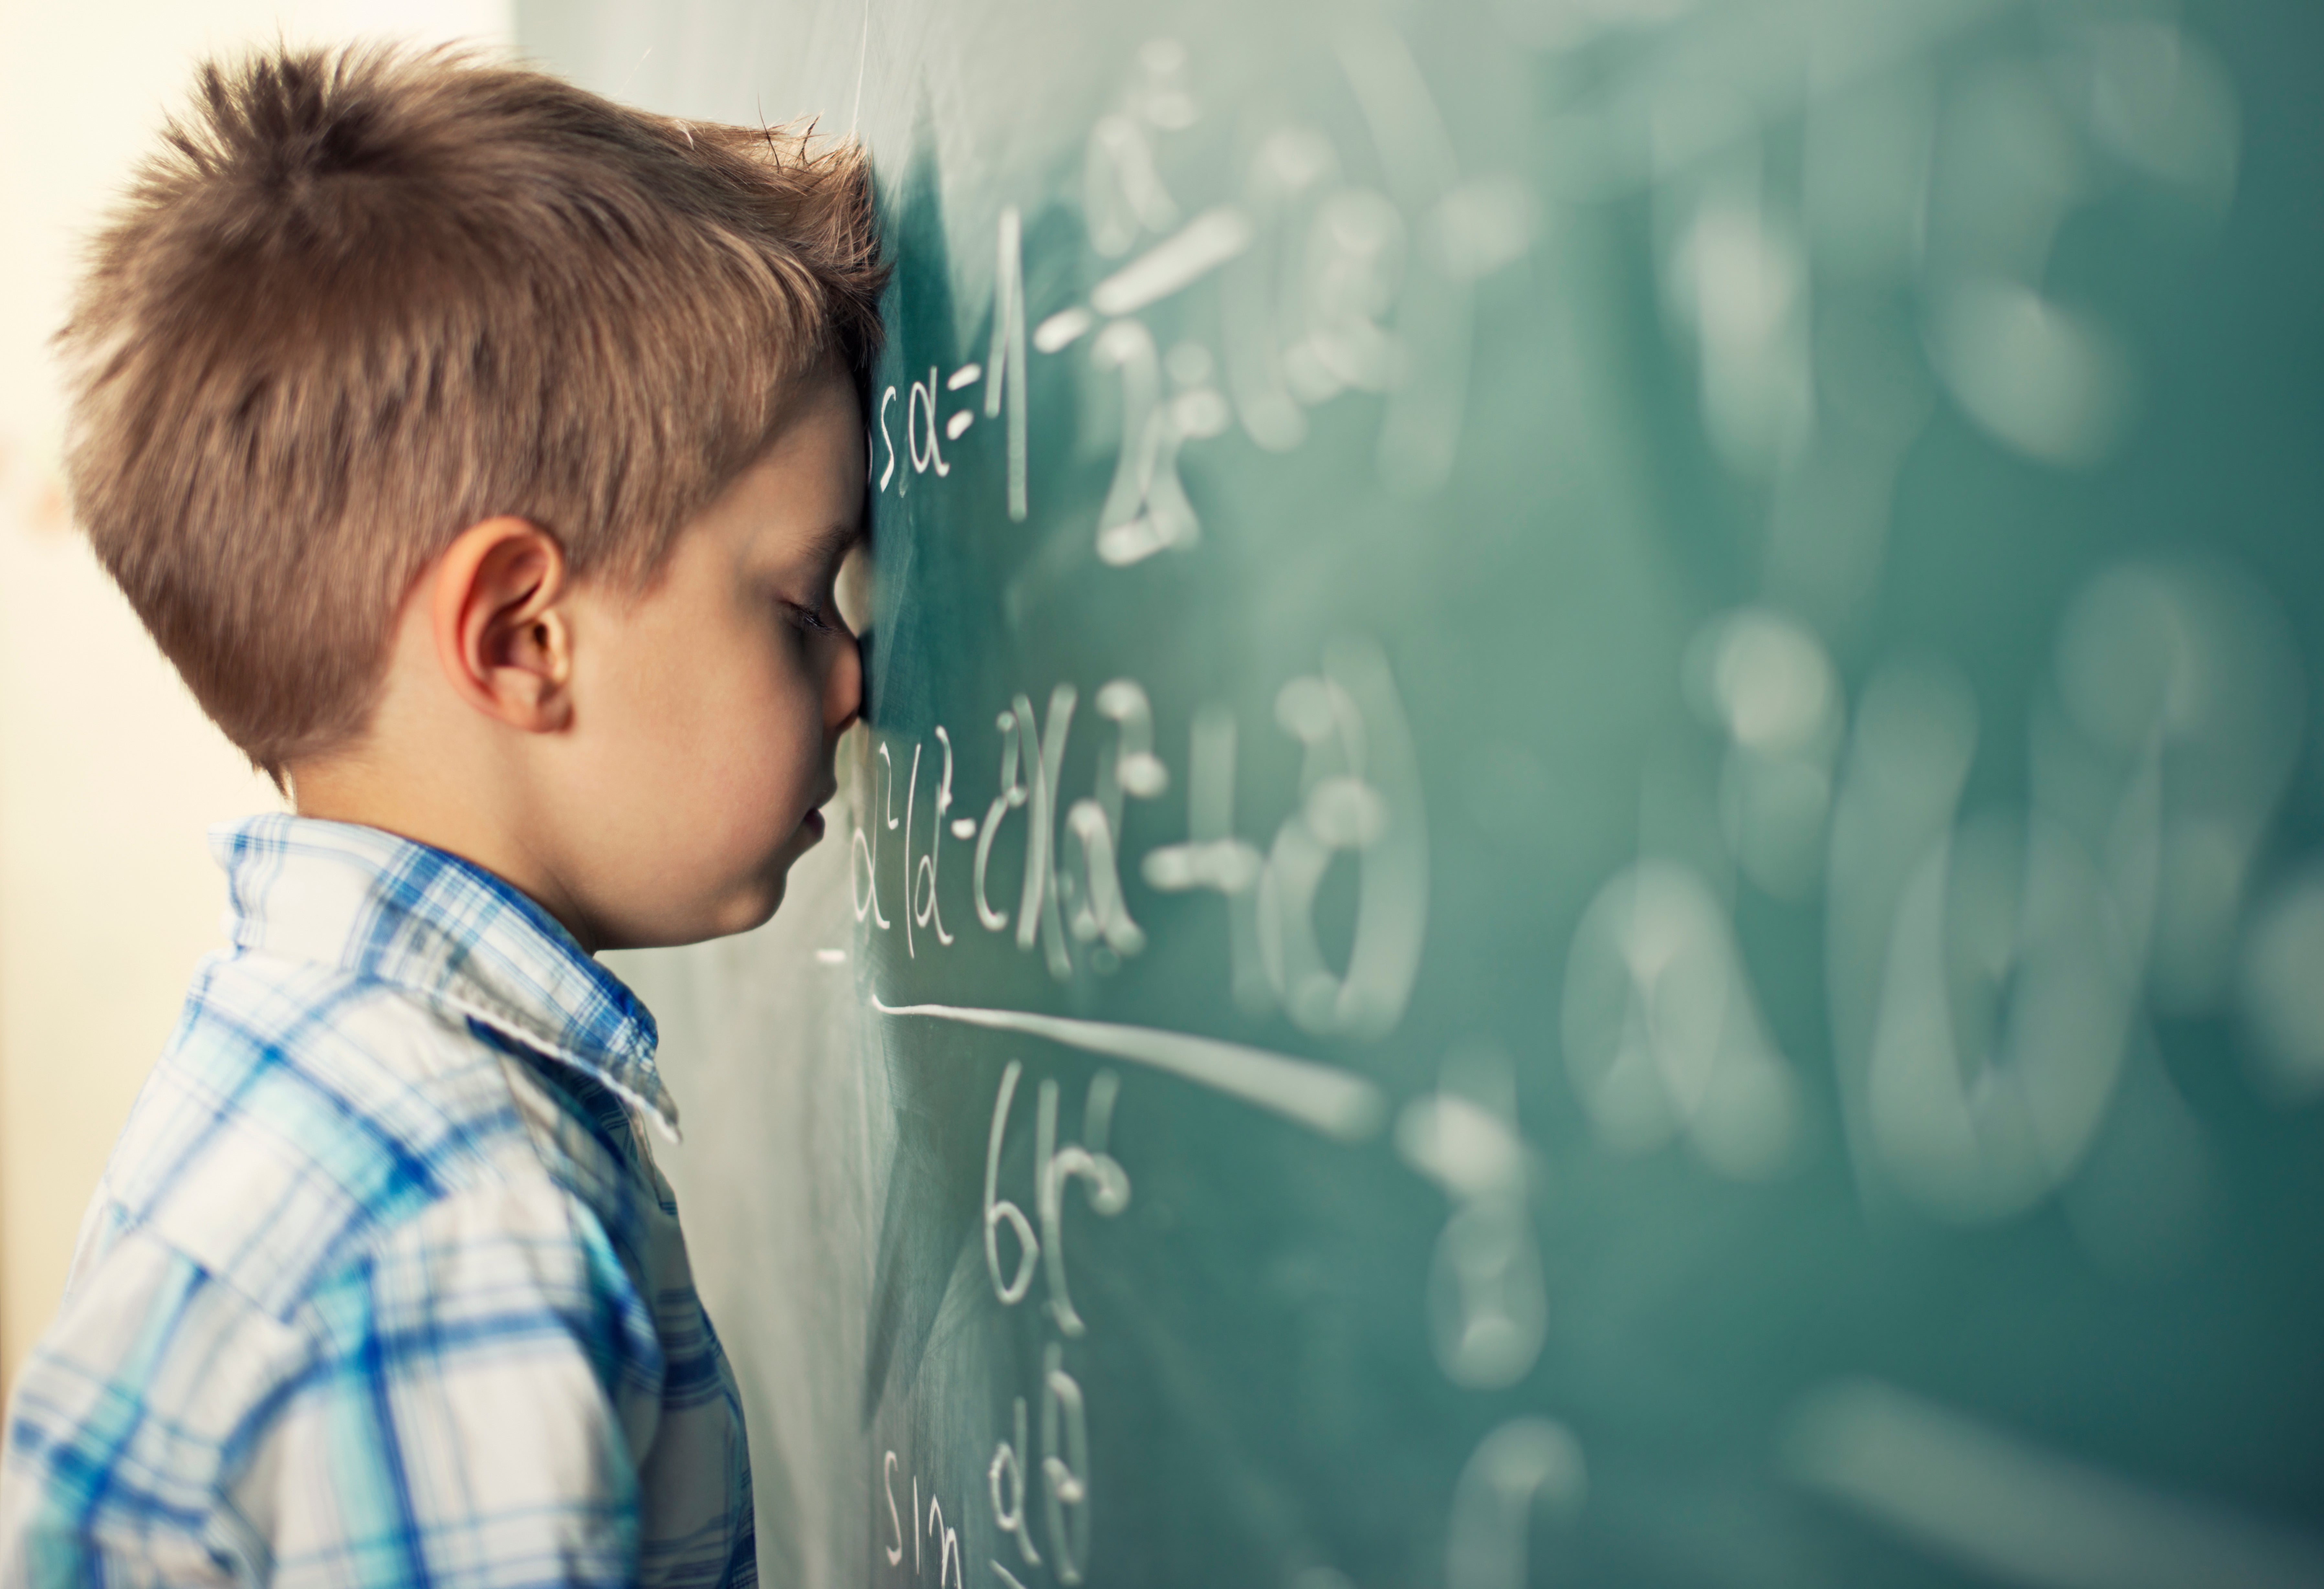 Maths should not be characterised by the drudgery associated with learning the times tables